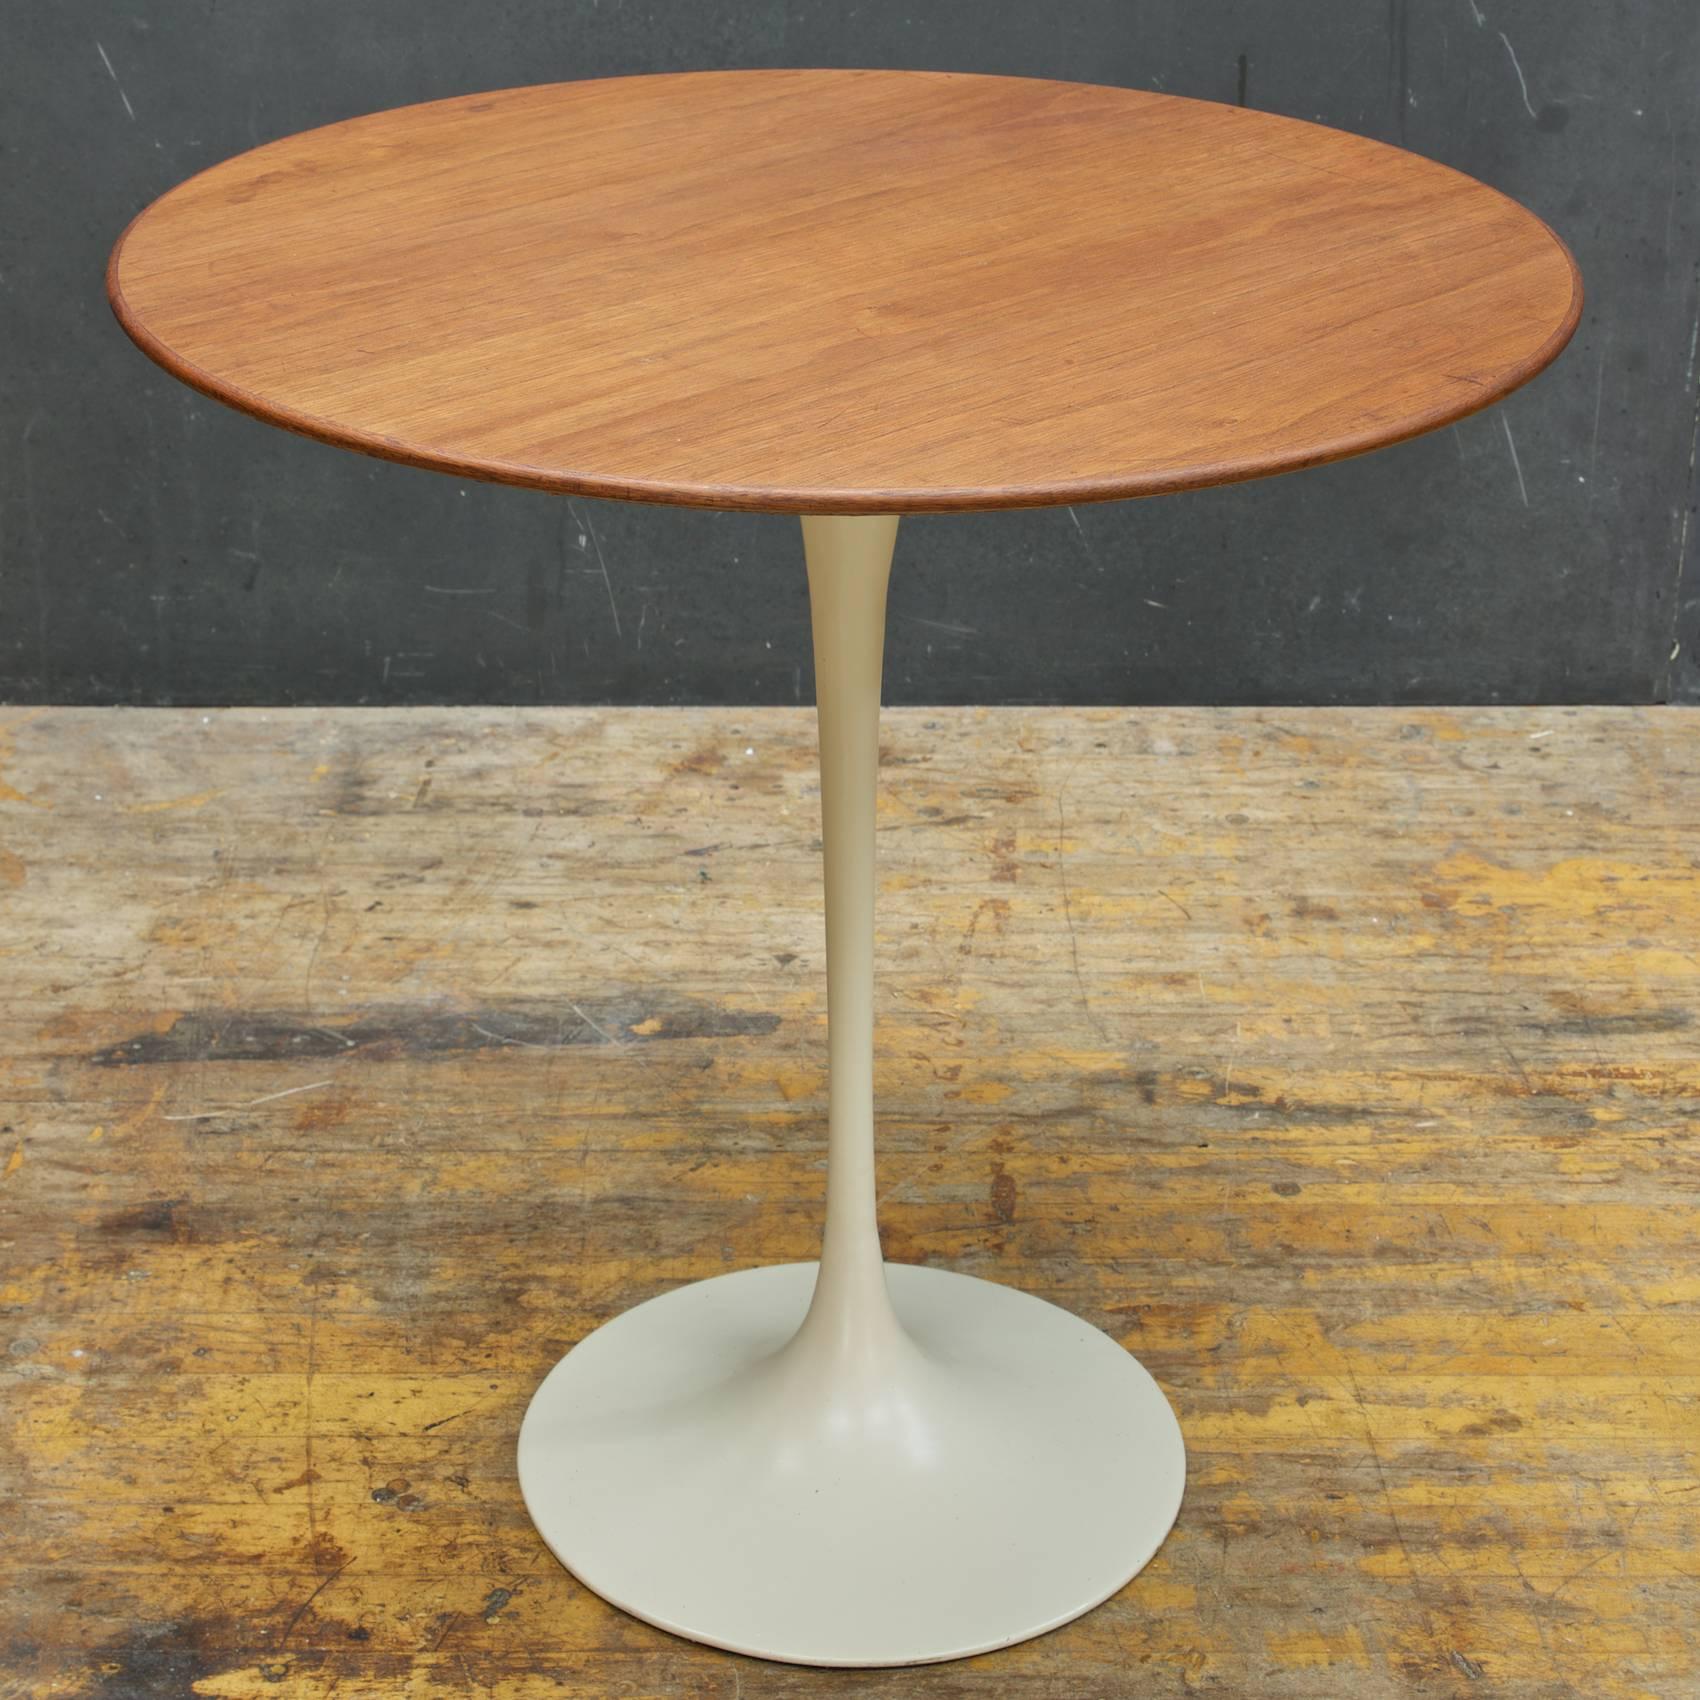 Side table with the larger diameter top. Retains original label, Knoll red bow tie logo, 320 Park Ave. NY.